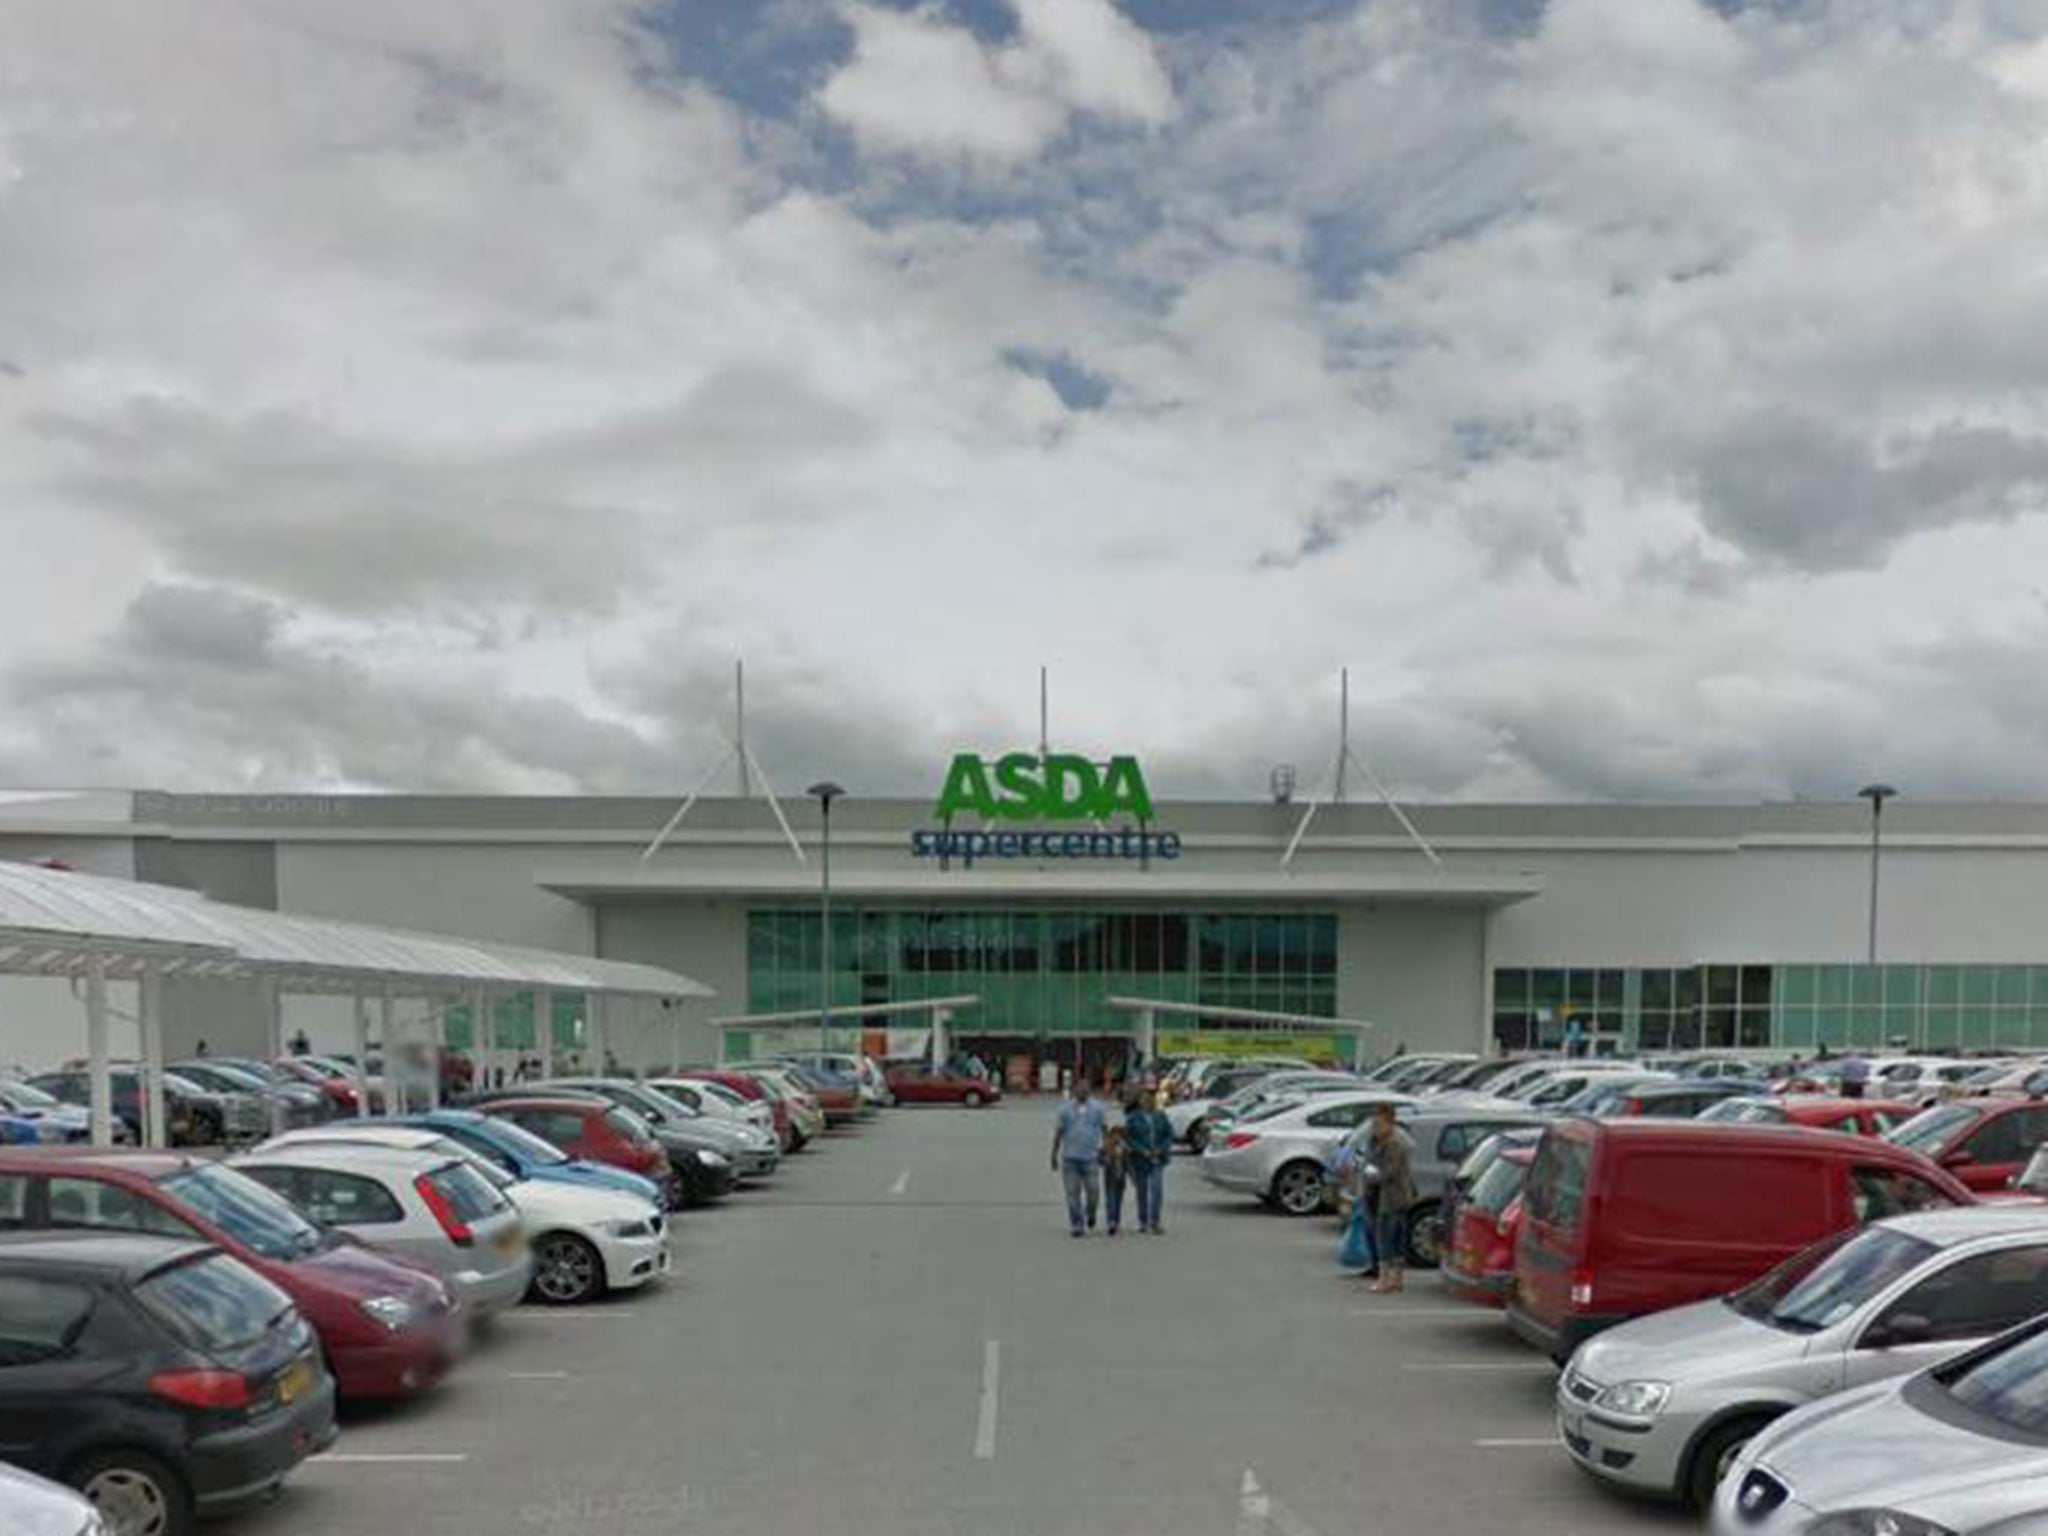 Asda has not performed well against the emergence of budget grocers